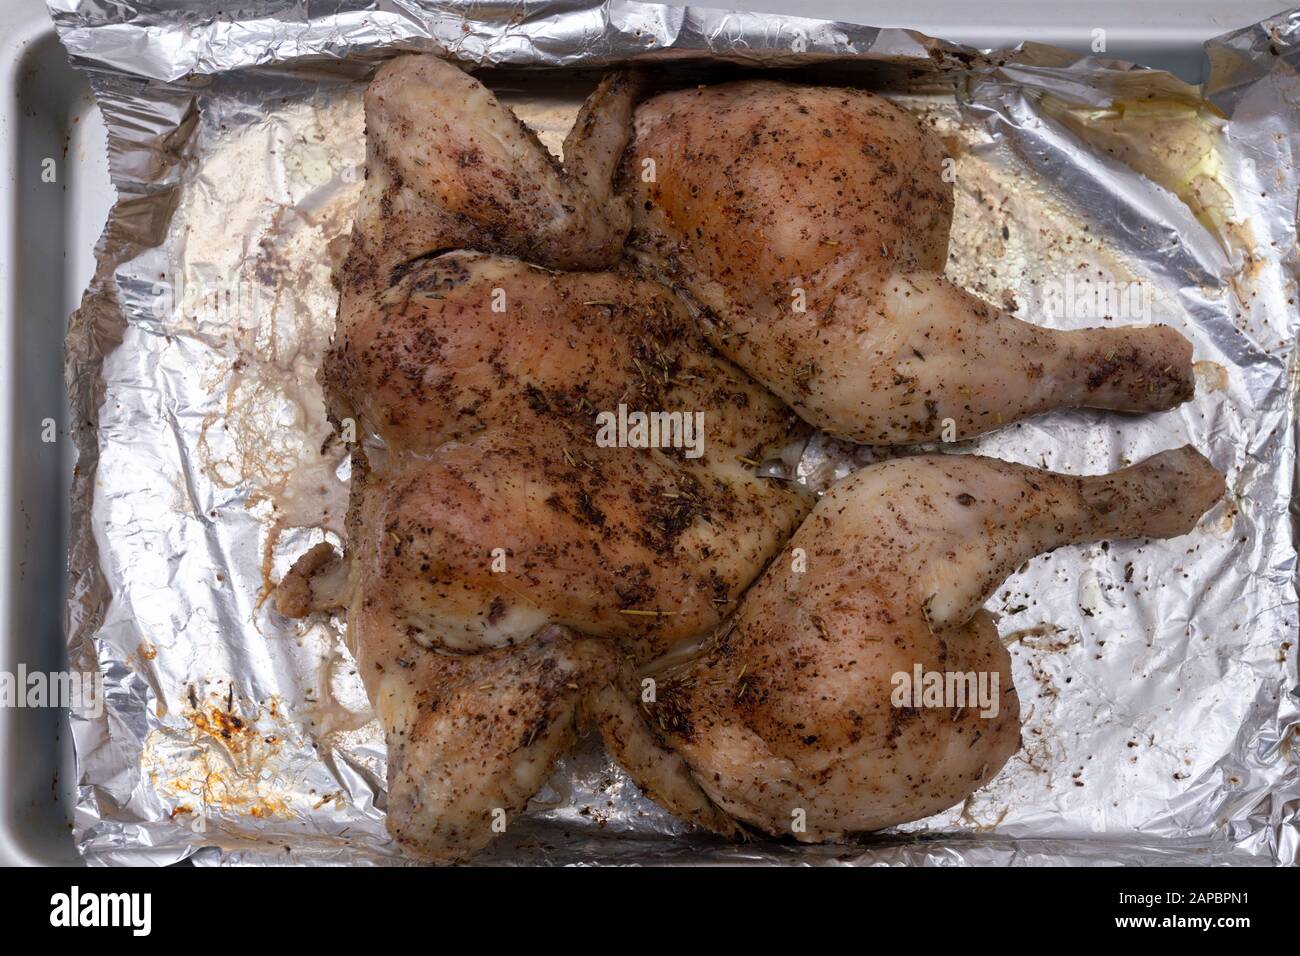 Oven grilled spatchcock chicken on foil Stock Photo